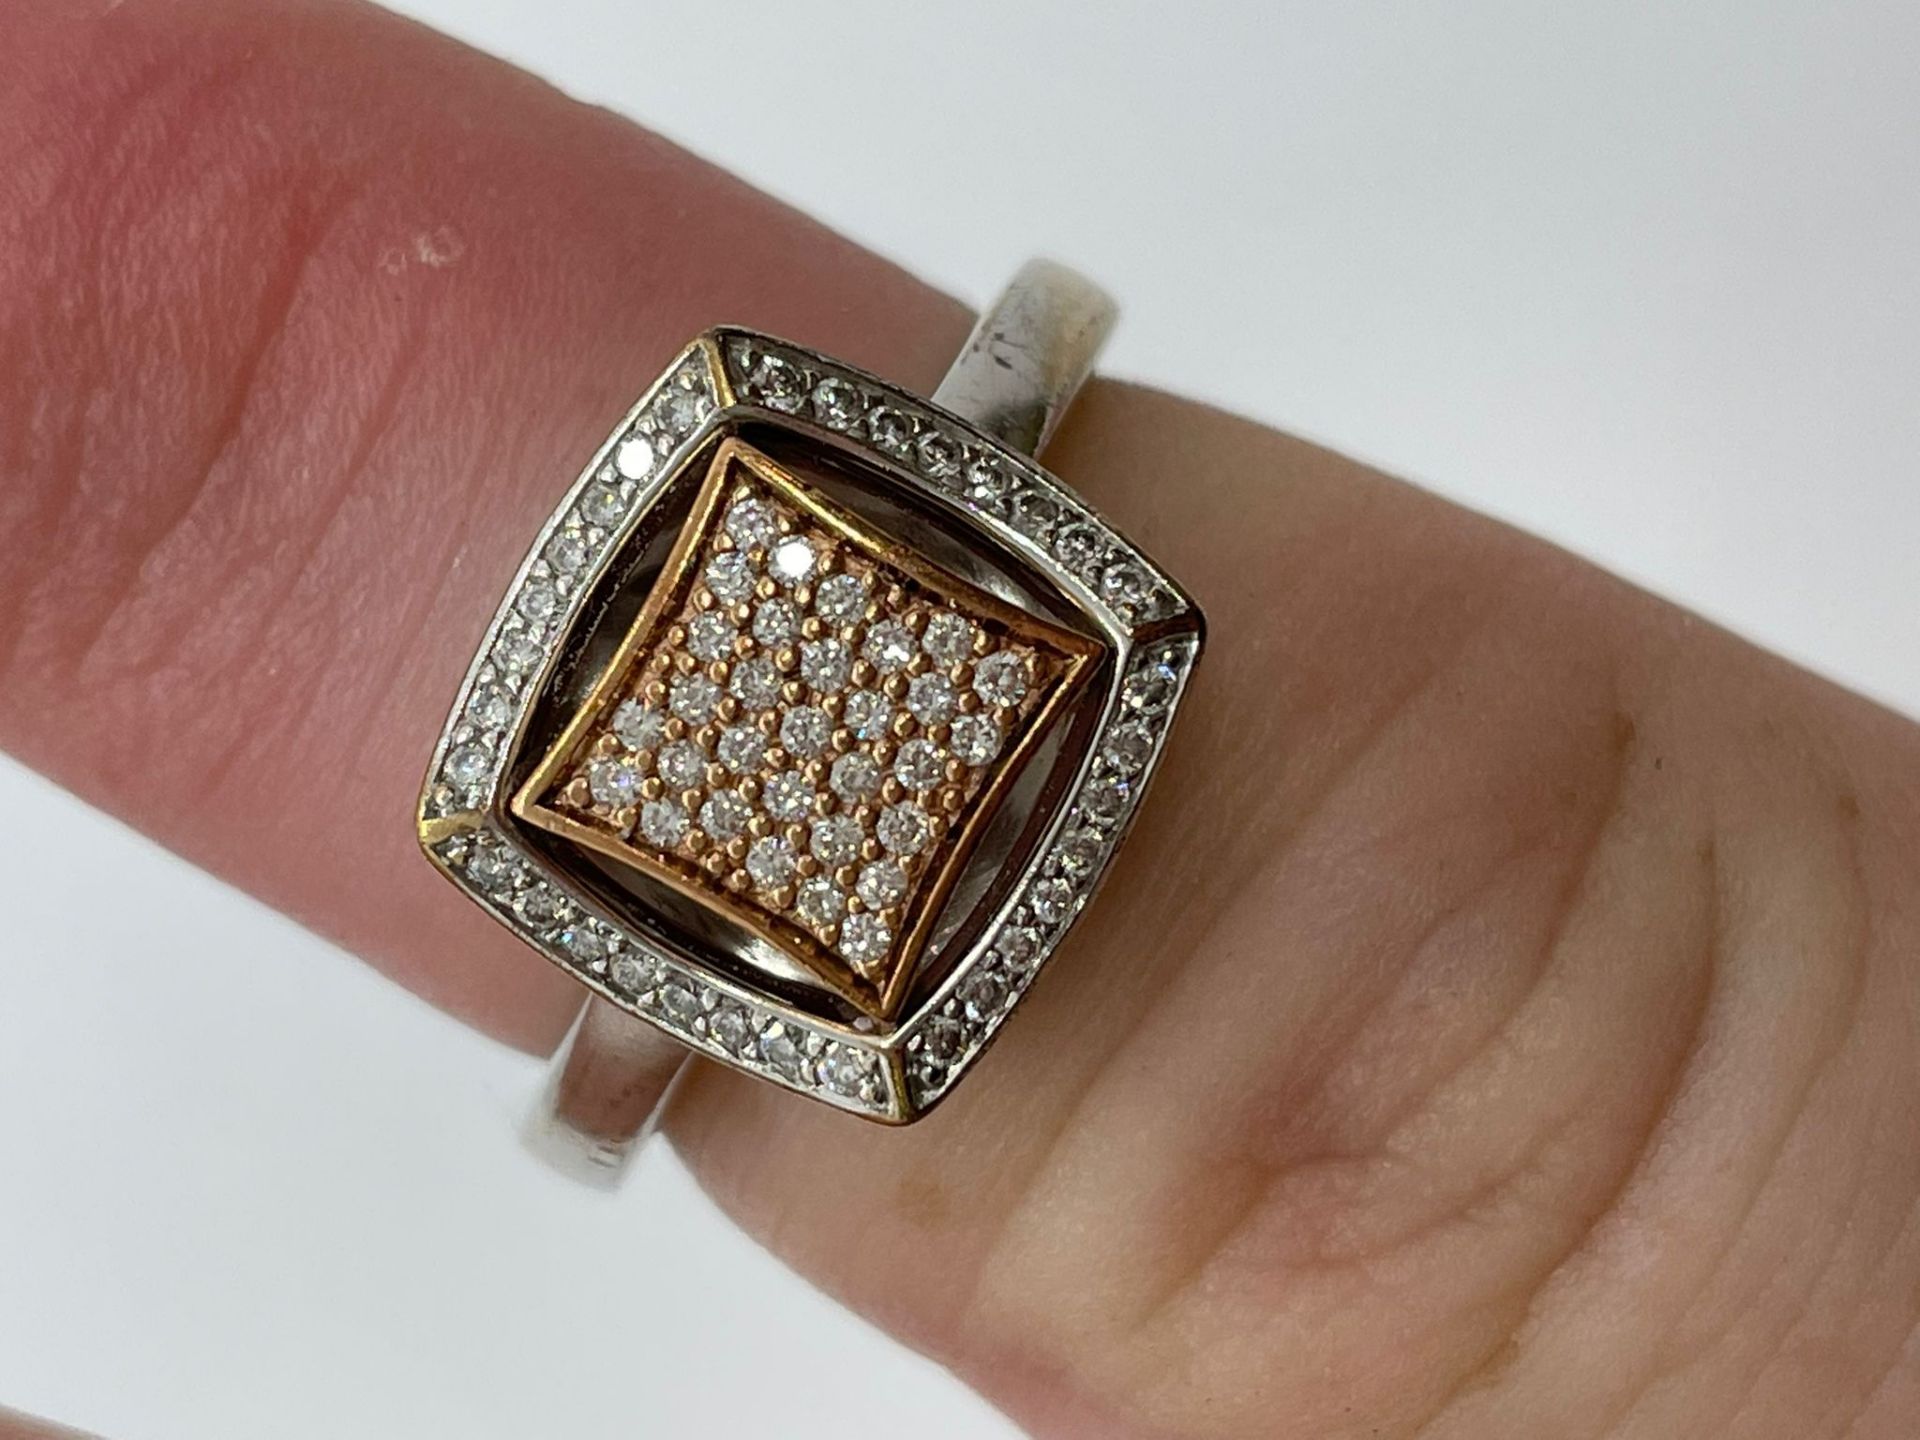 9ct white and rose gold diamond ring - Image 3 of 3